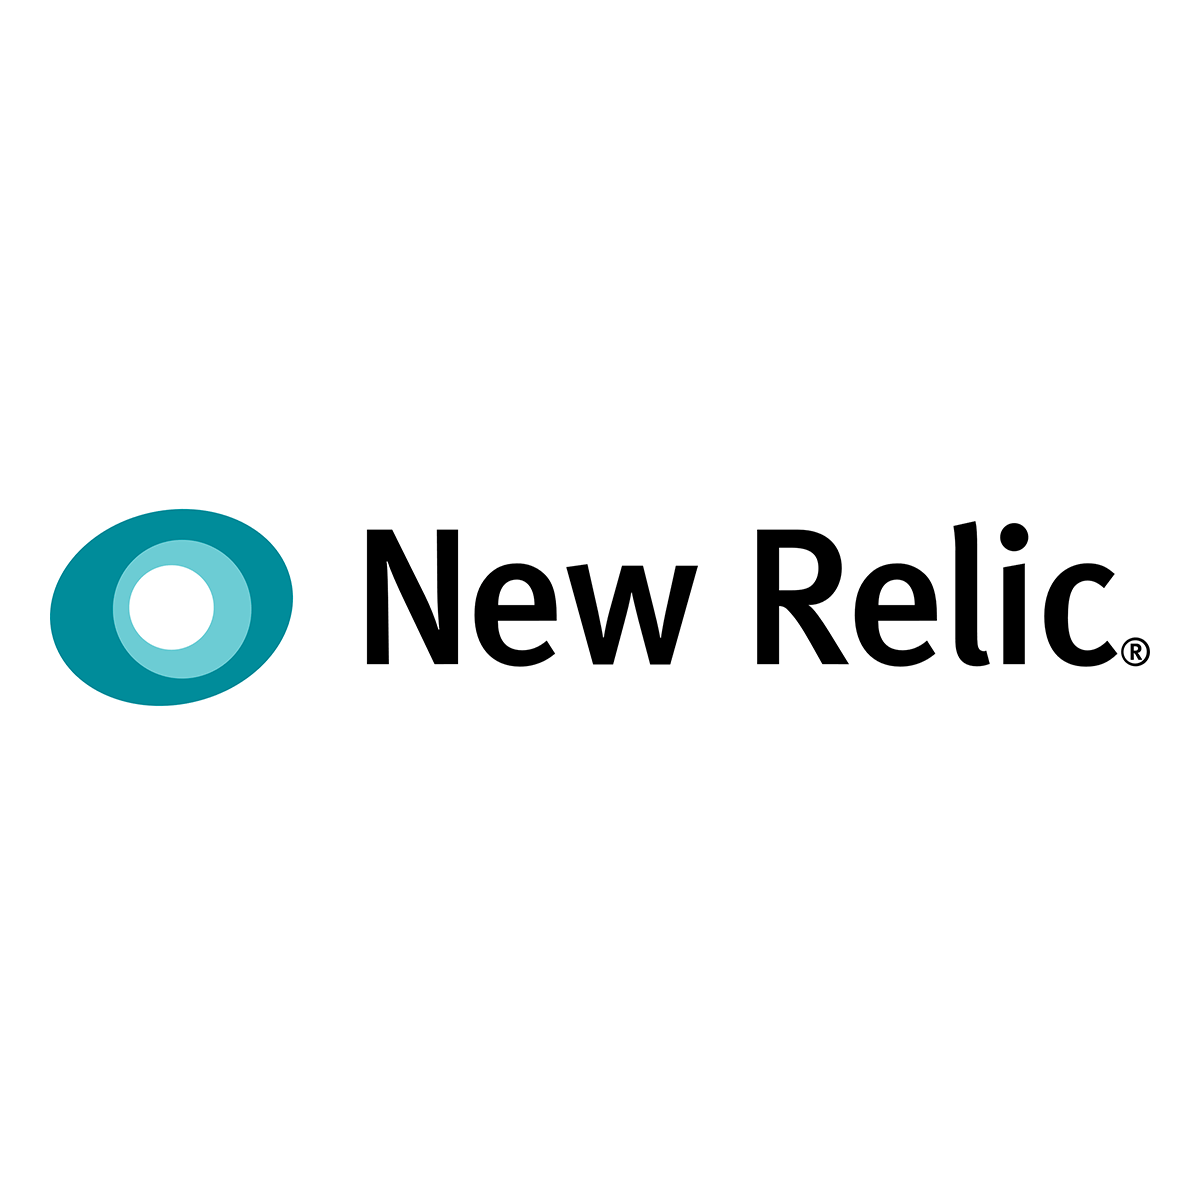 Relic Logo - Media Assets and Official New Relic Logos. About New Relic